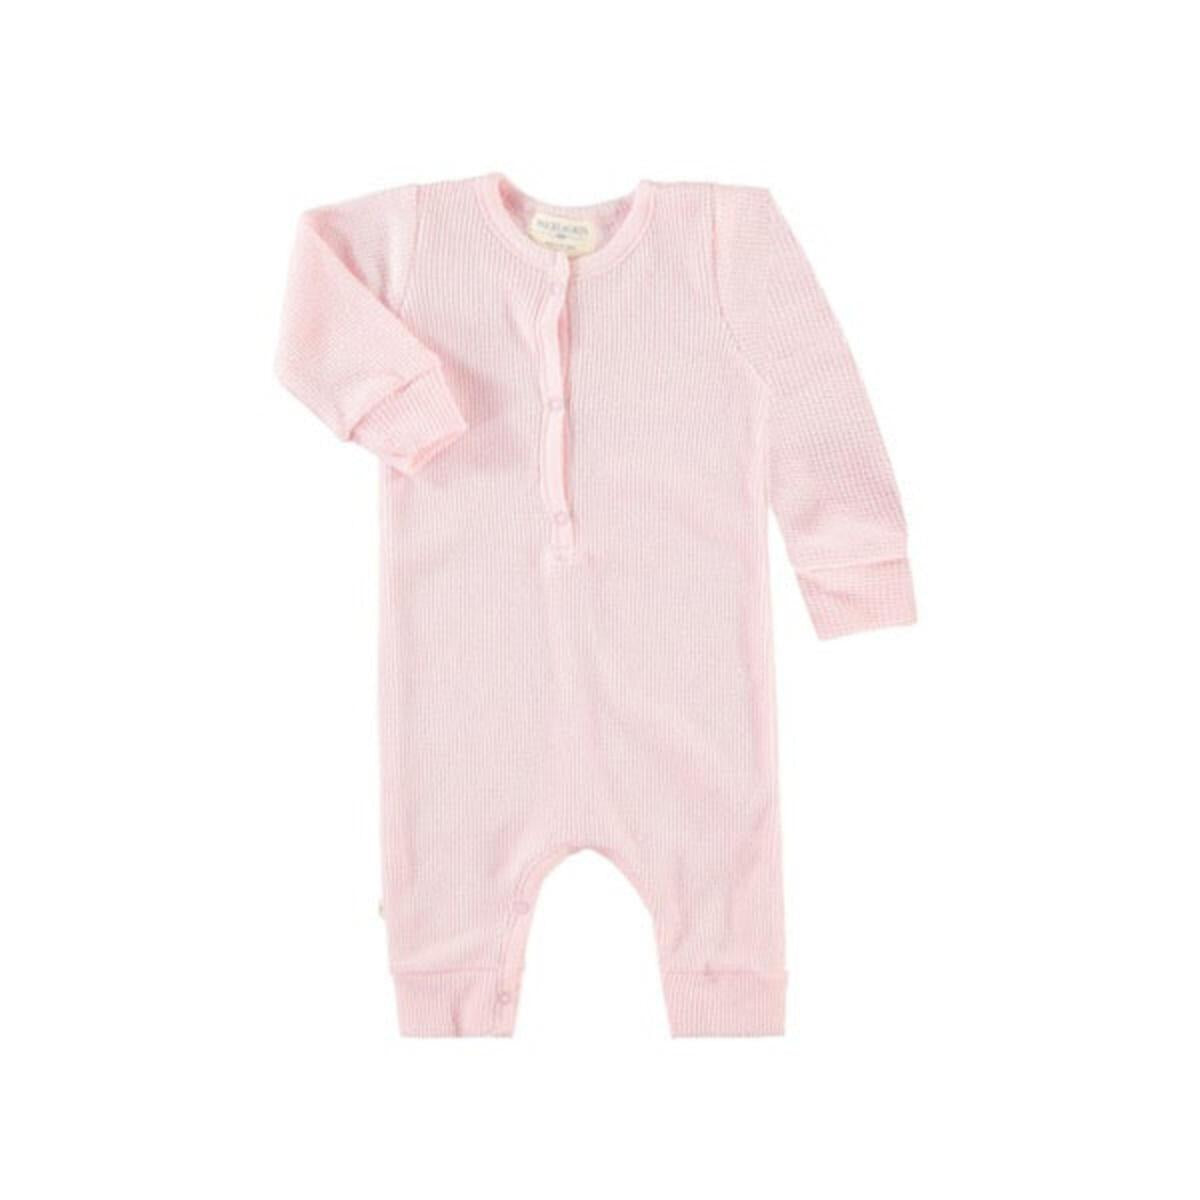 baby thermal henley romper in light pink